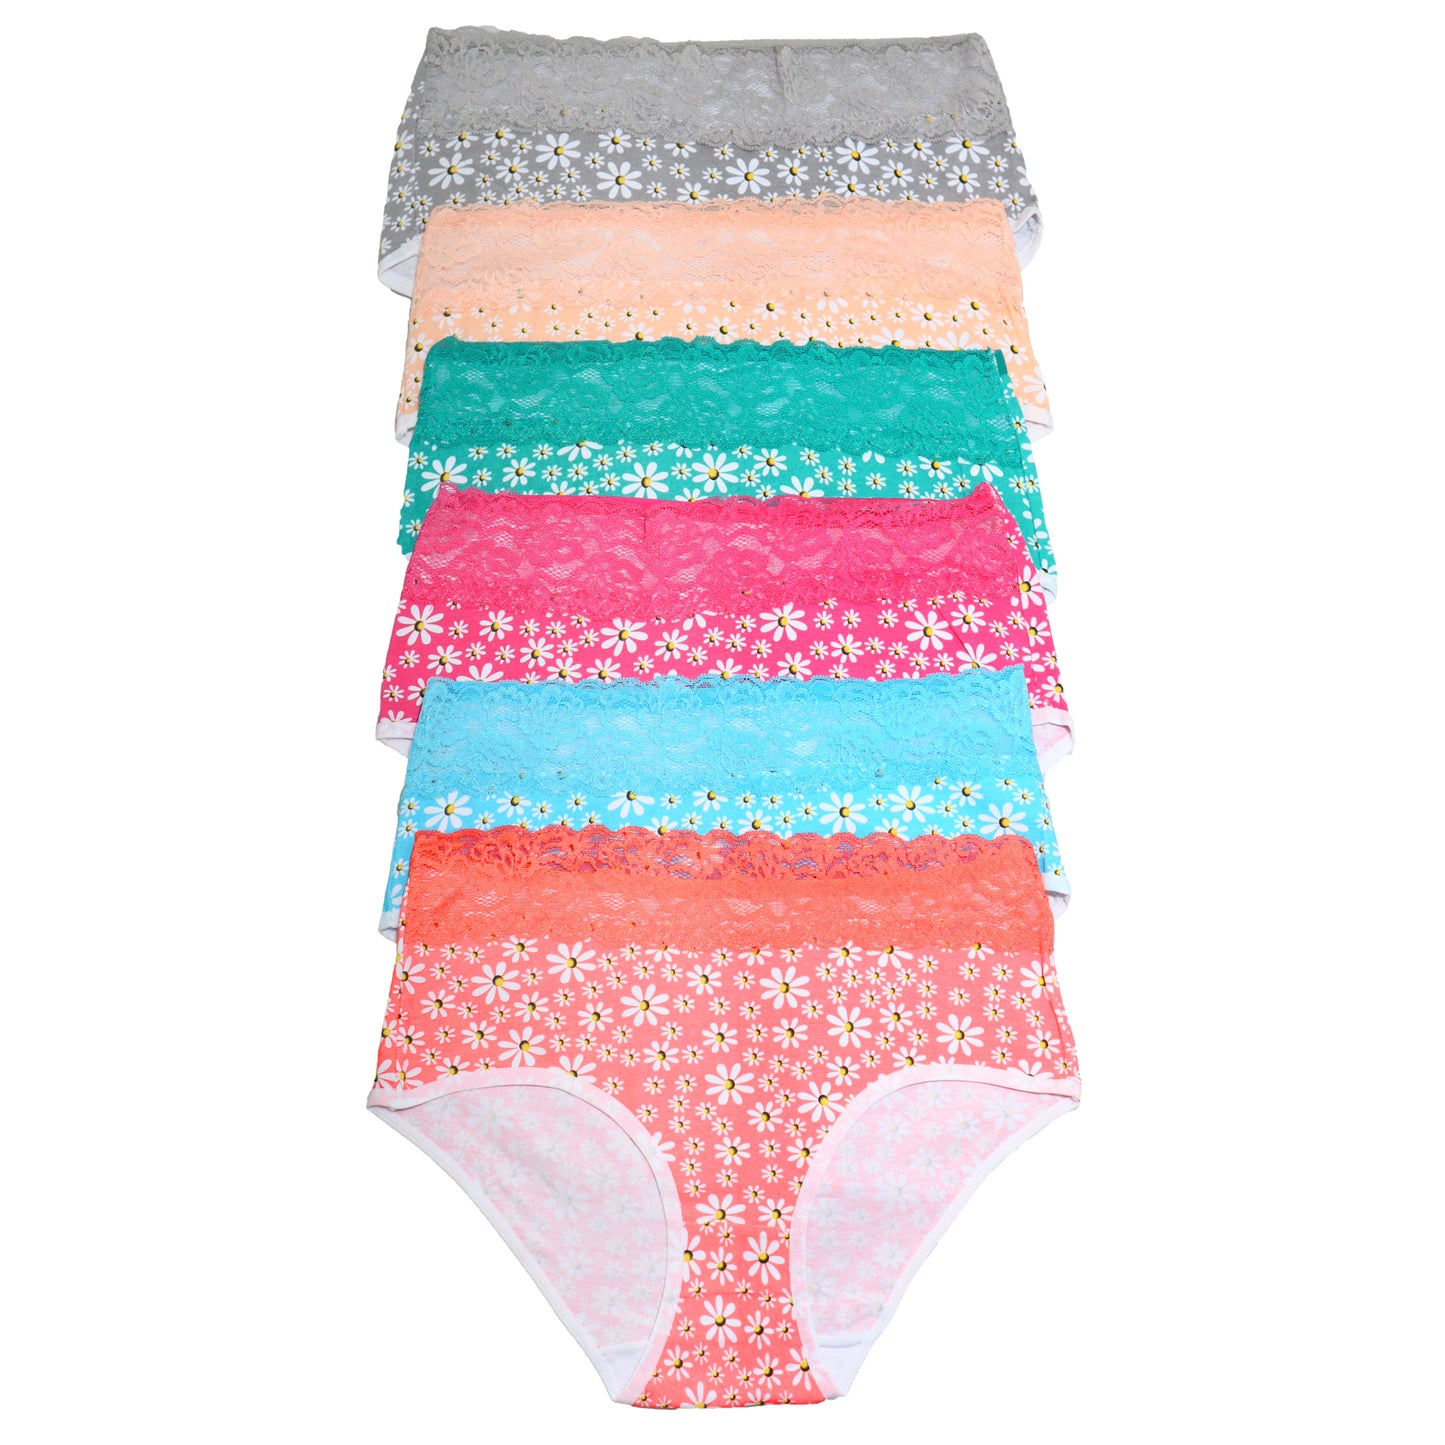 Cotton Hiphugger Panties with Lace Front Waistband (6-Pack)